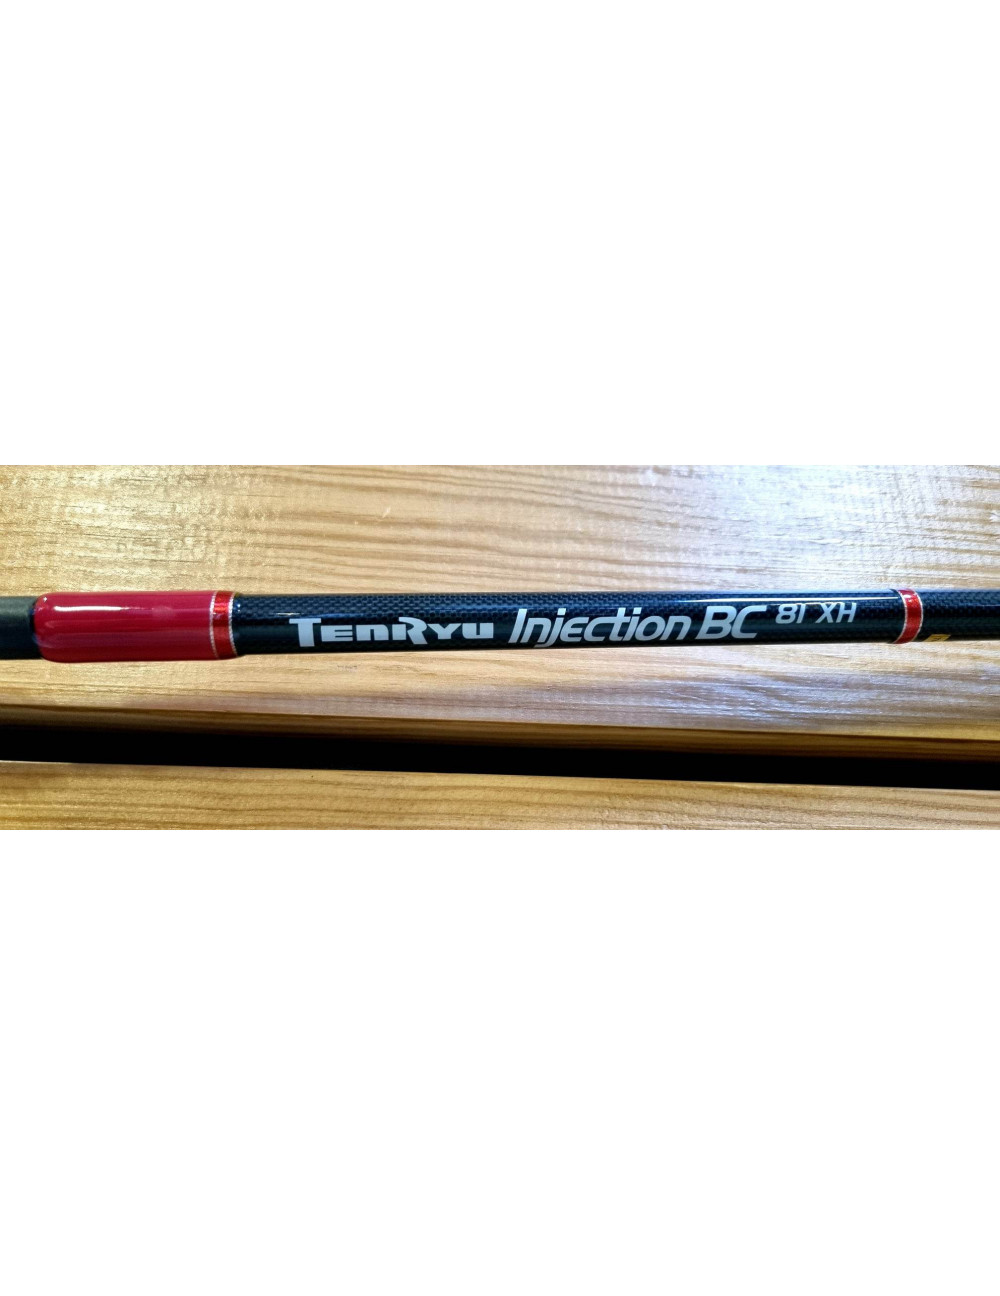 CANNE CASTING TENRYU INJECTION BC 81XH